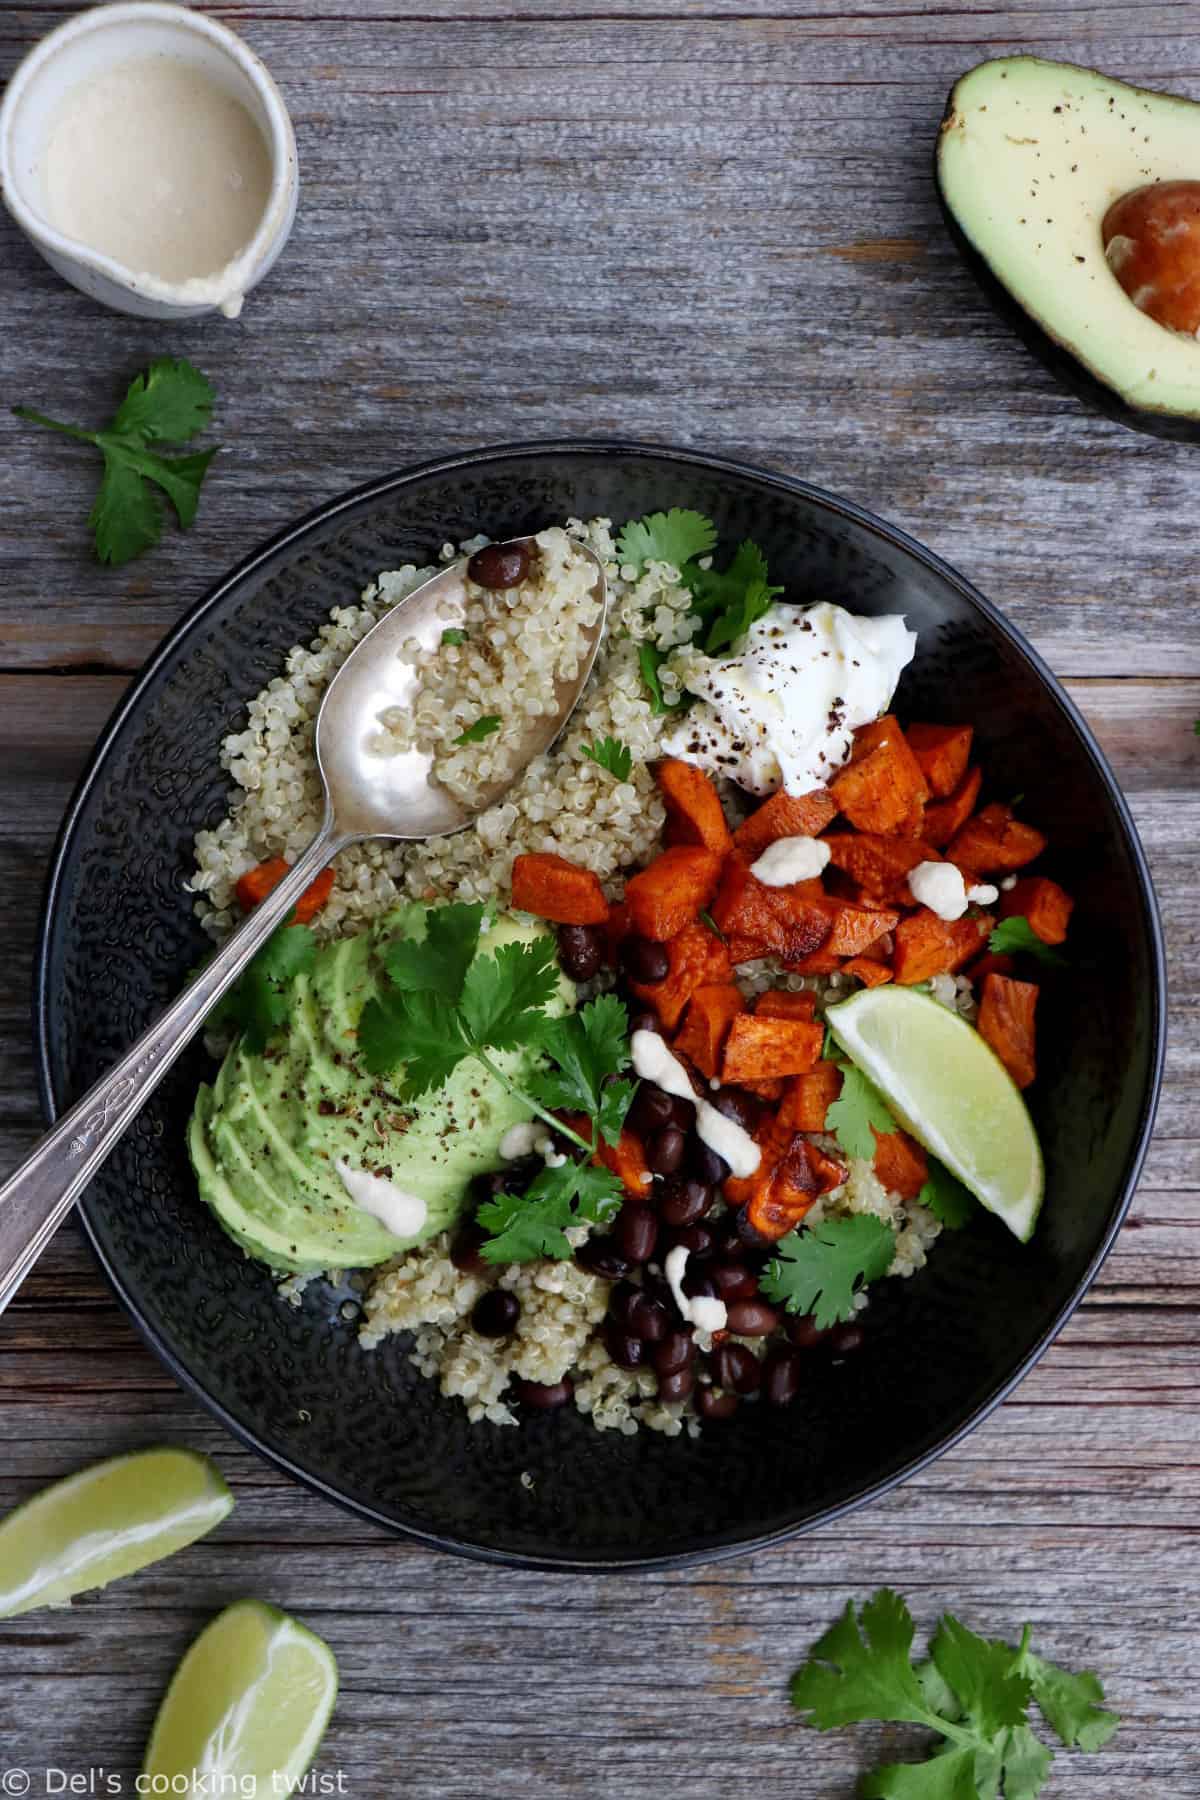 Sweet potato black bean quinoa bowl with tahini dressing makes a nourishing, healthy vegan meal loaded with veggies and plant-based protein.